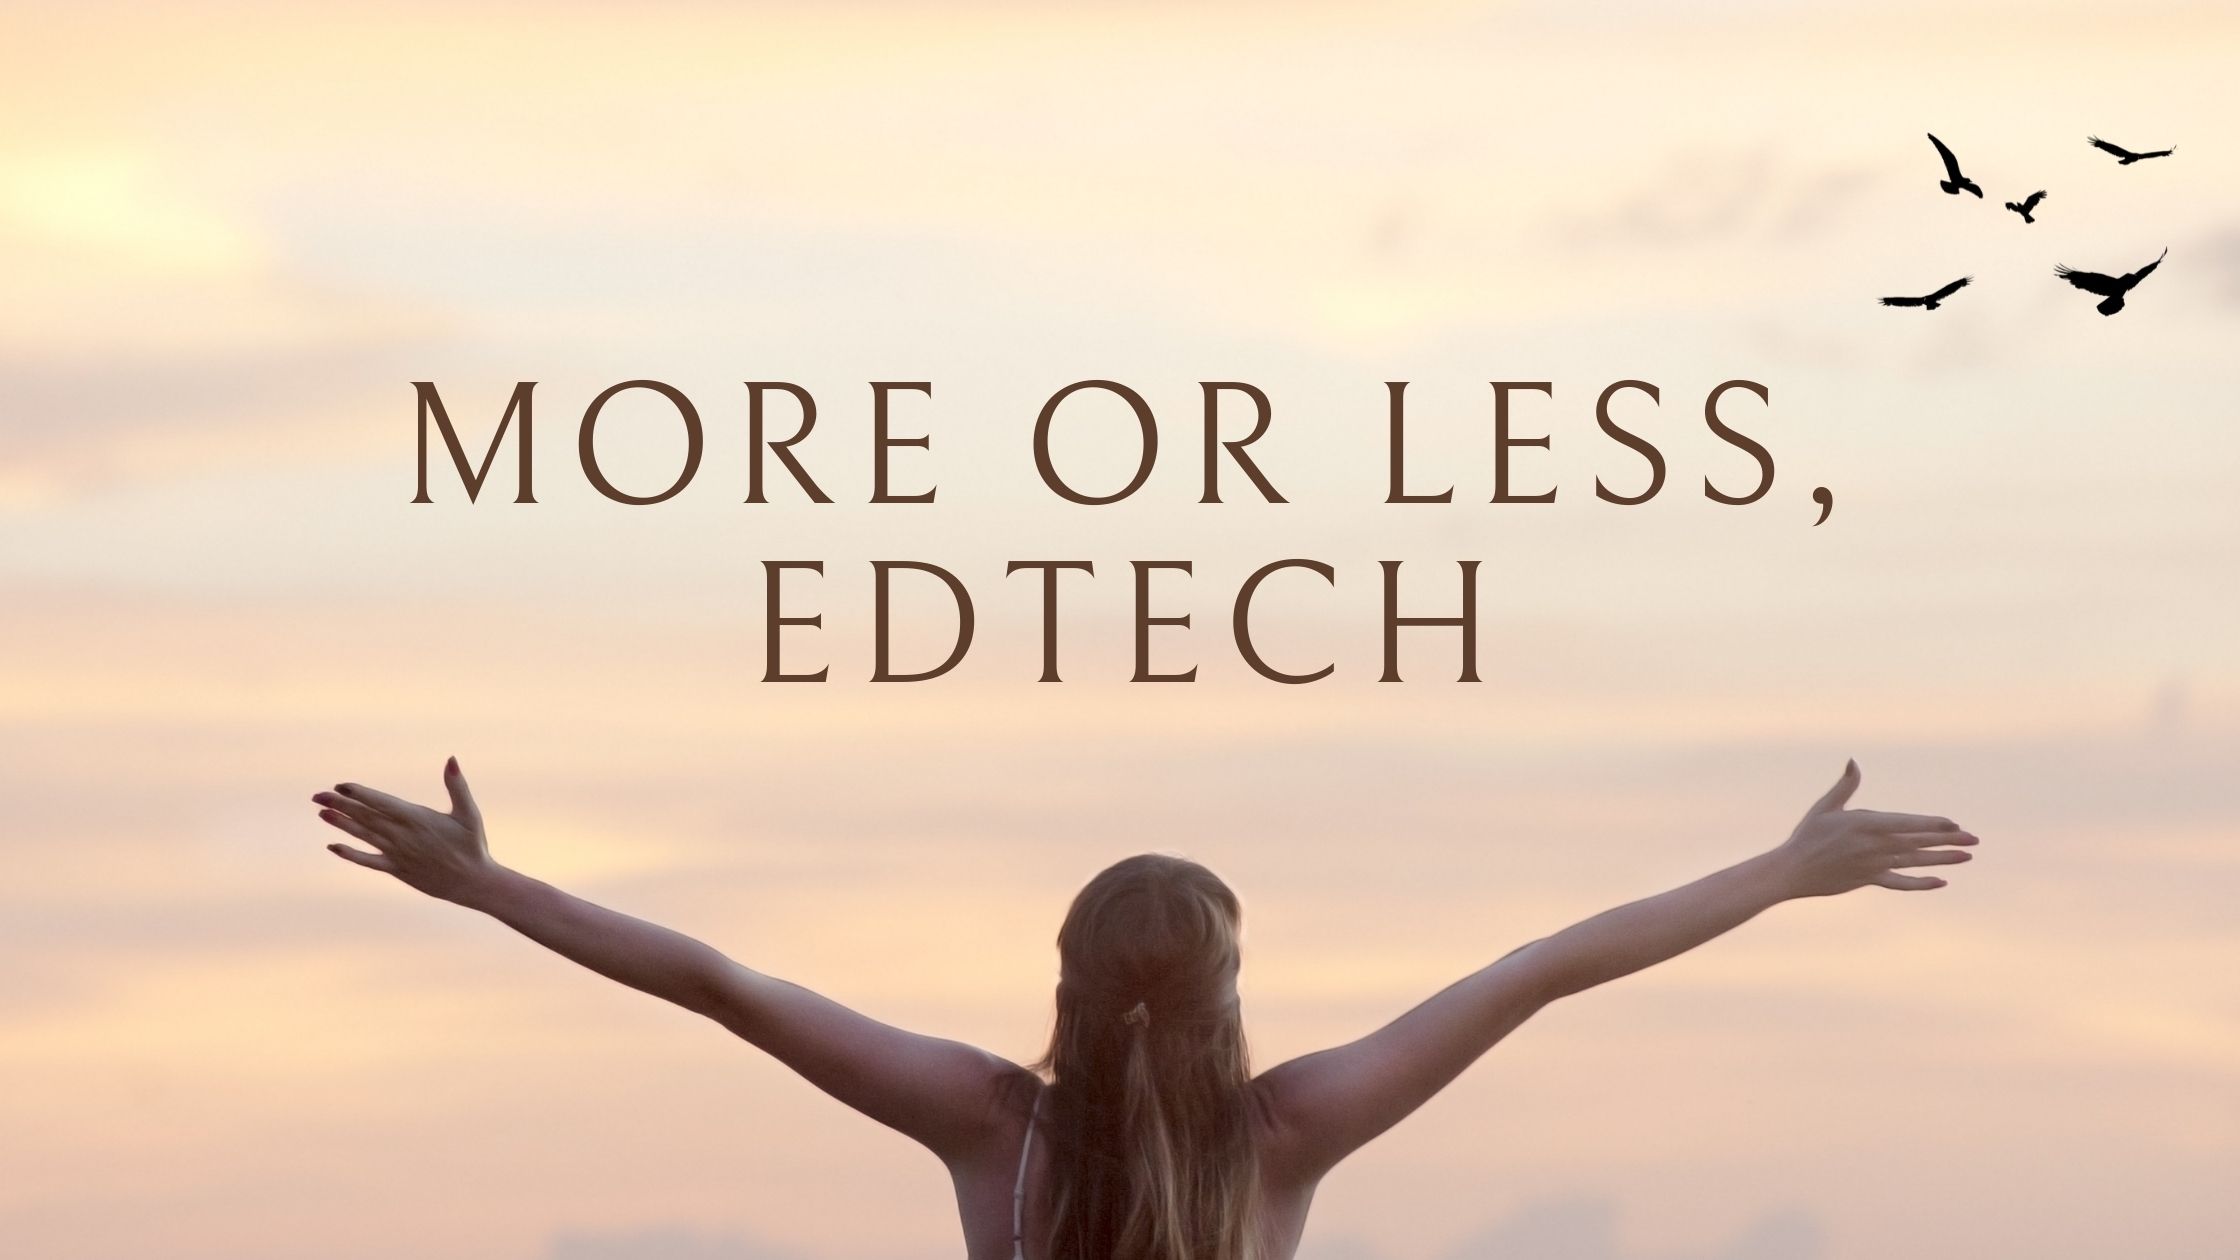 More or less, edtech